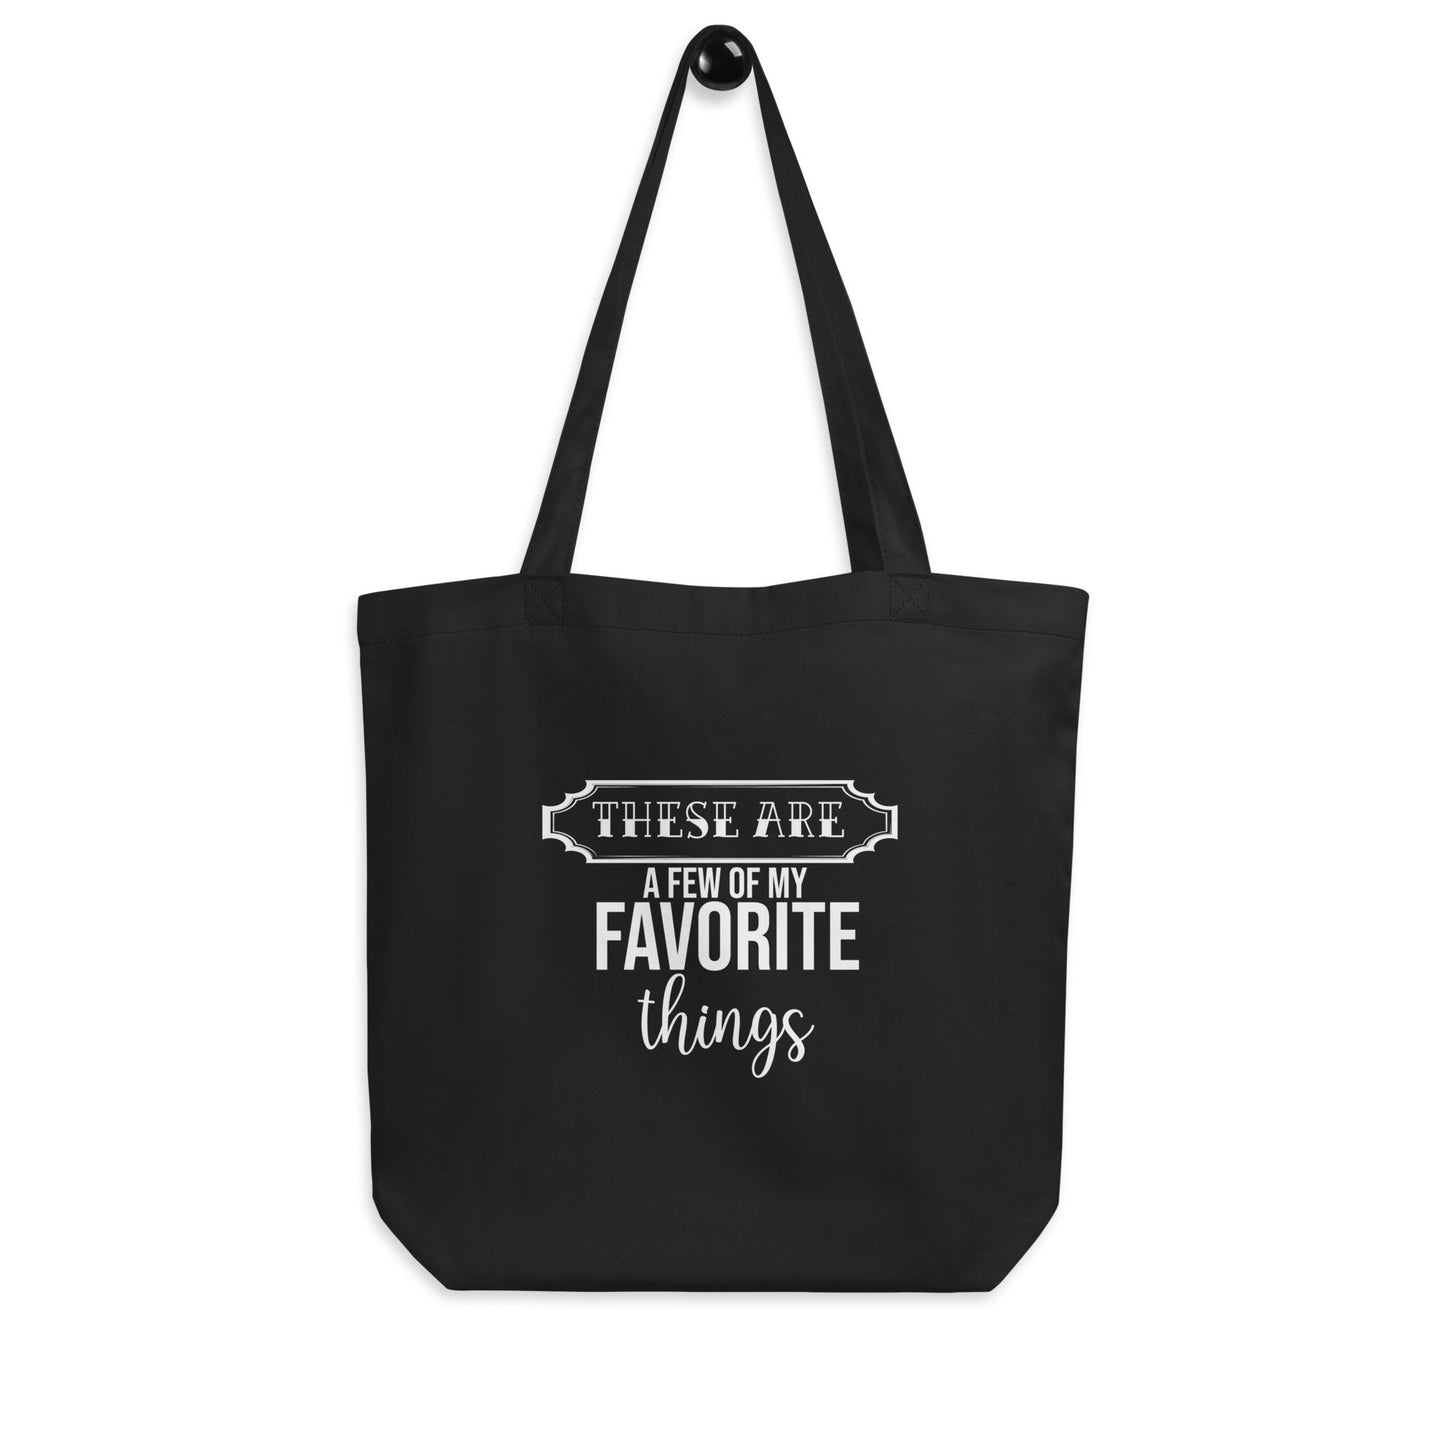 Eco Tote Bag Black - These Are A Few of my Favorite Things